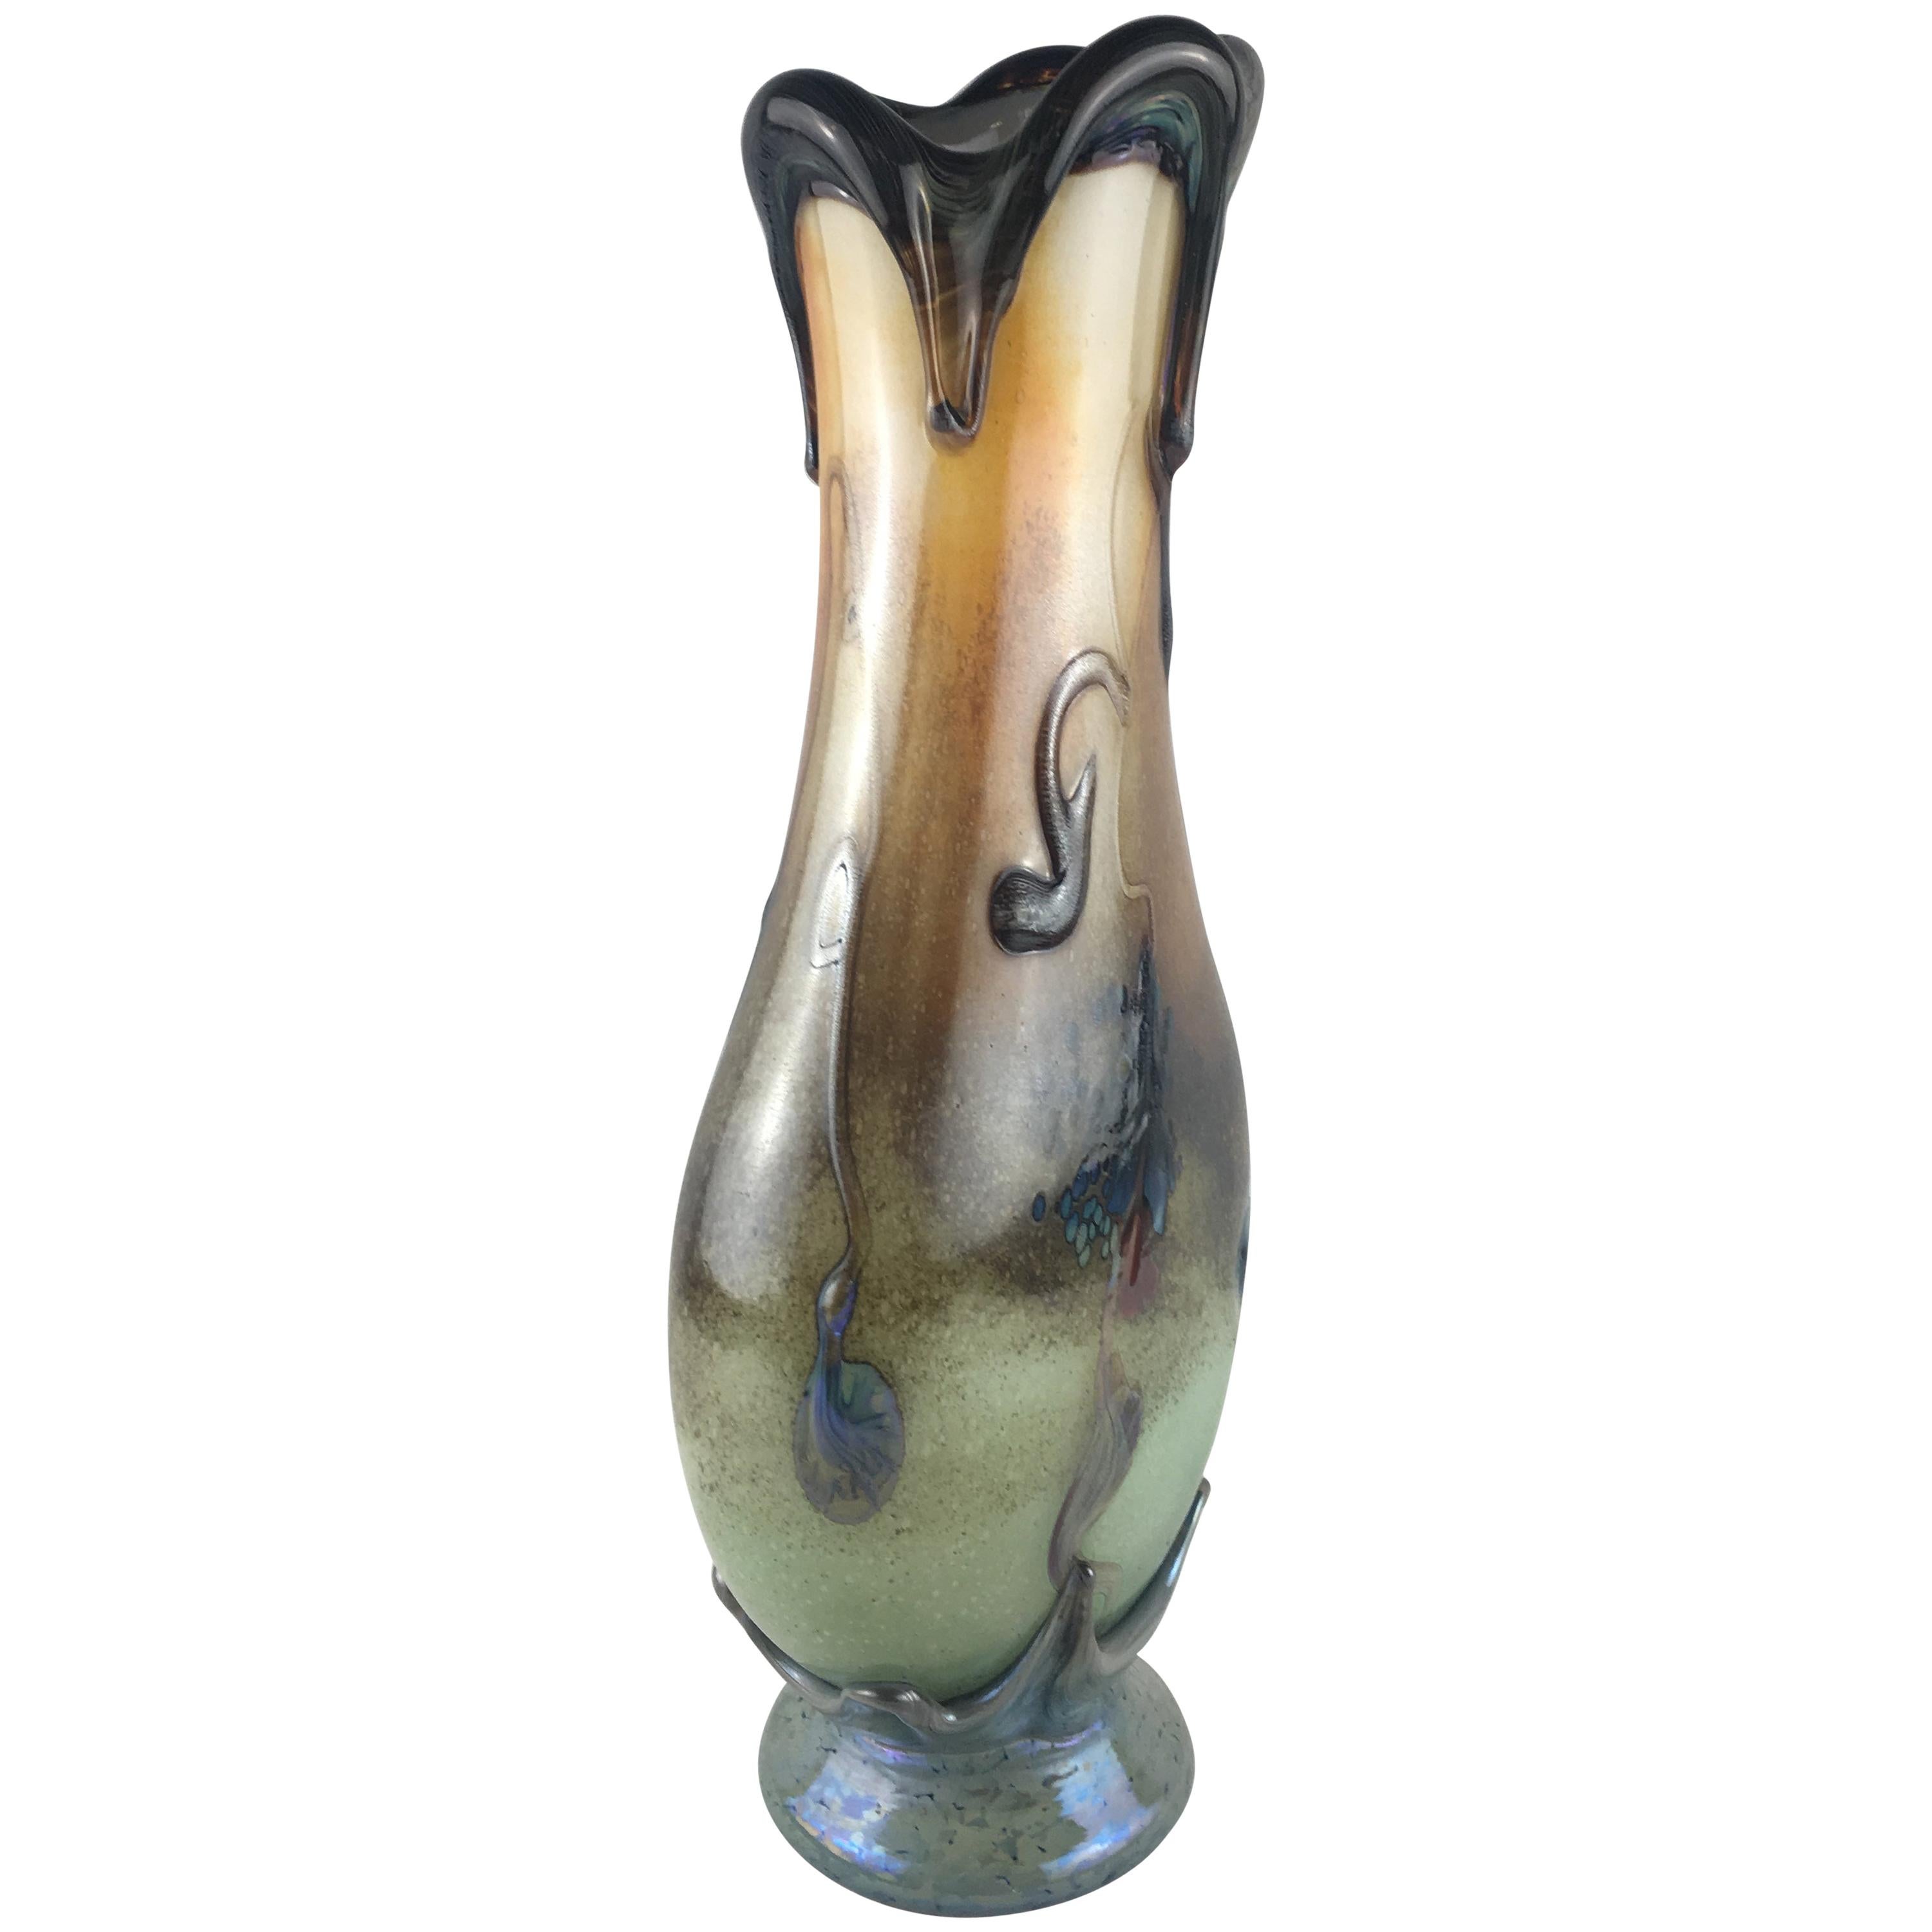 Art Nouveau Style Vase signed Guyot and Aconito from Biot, France